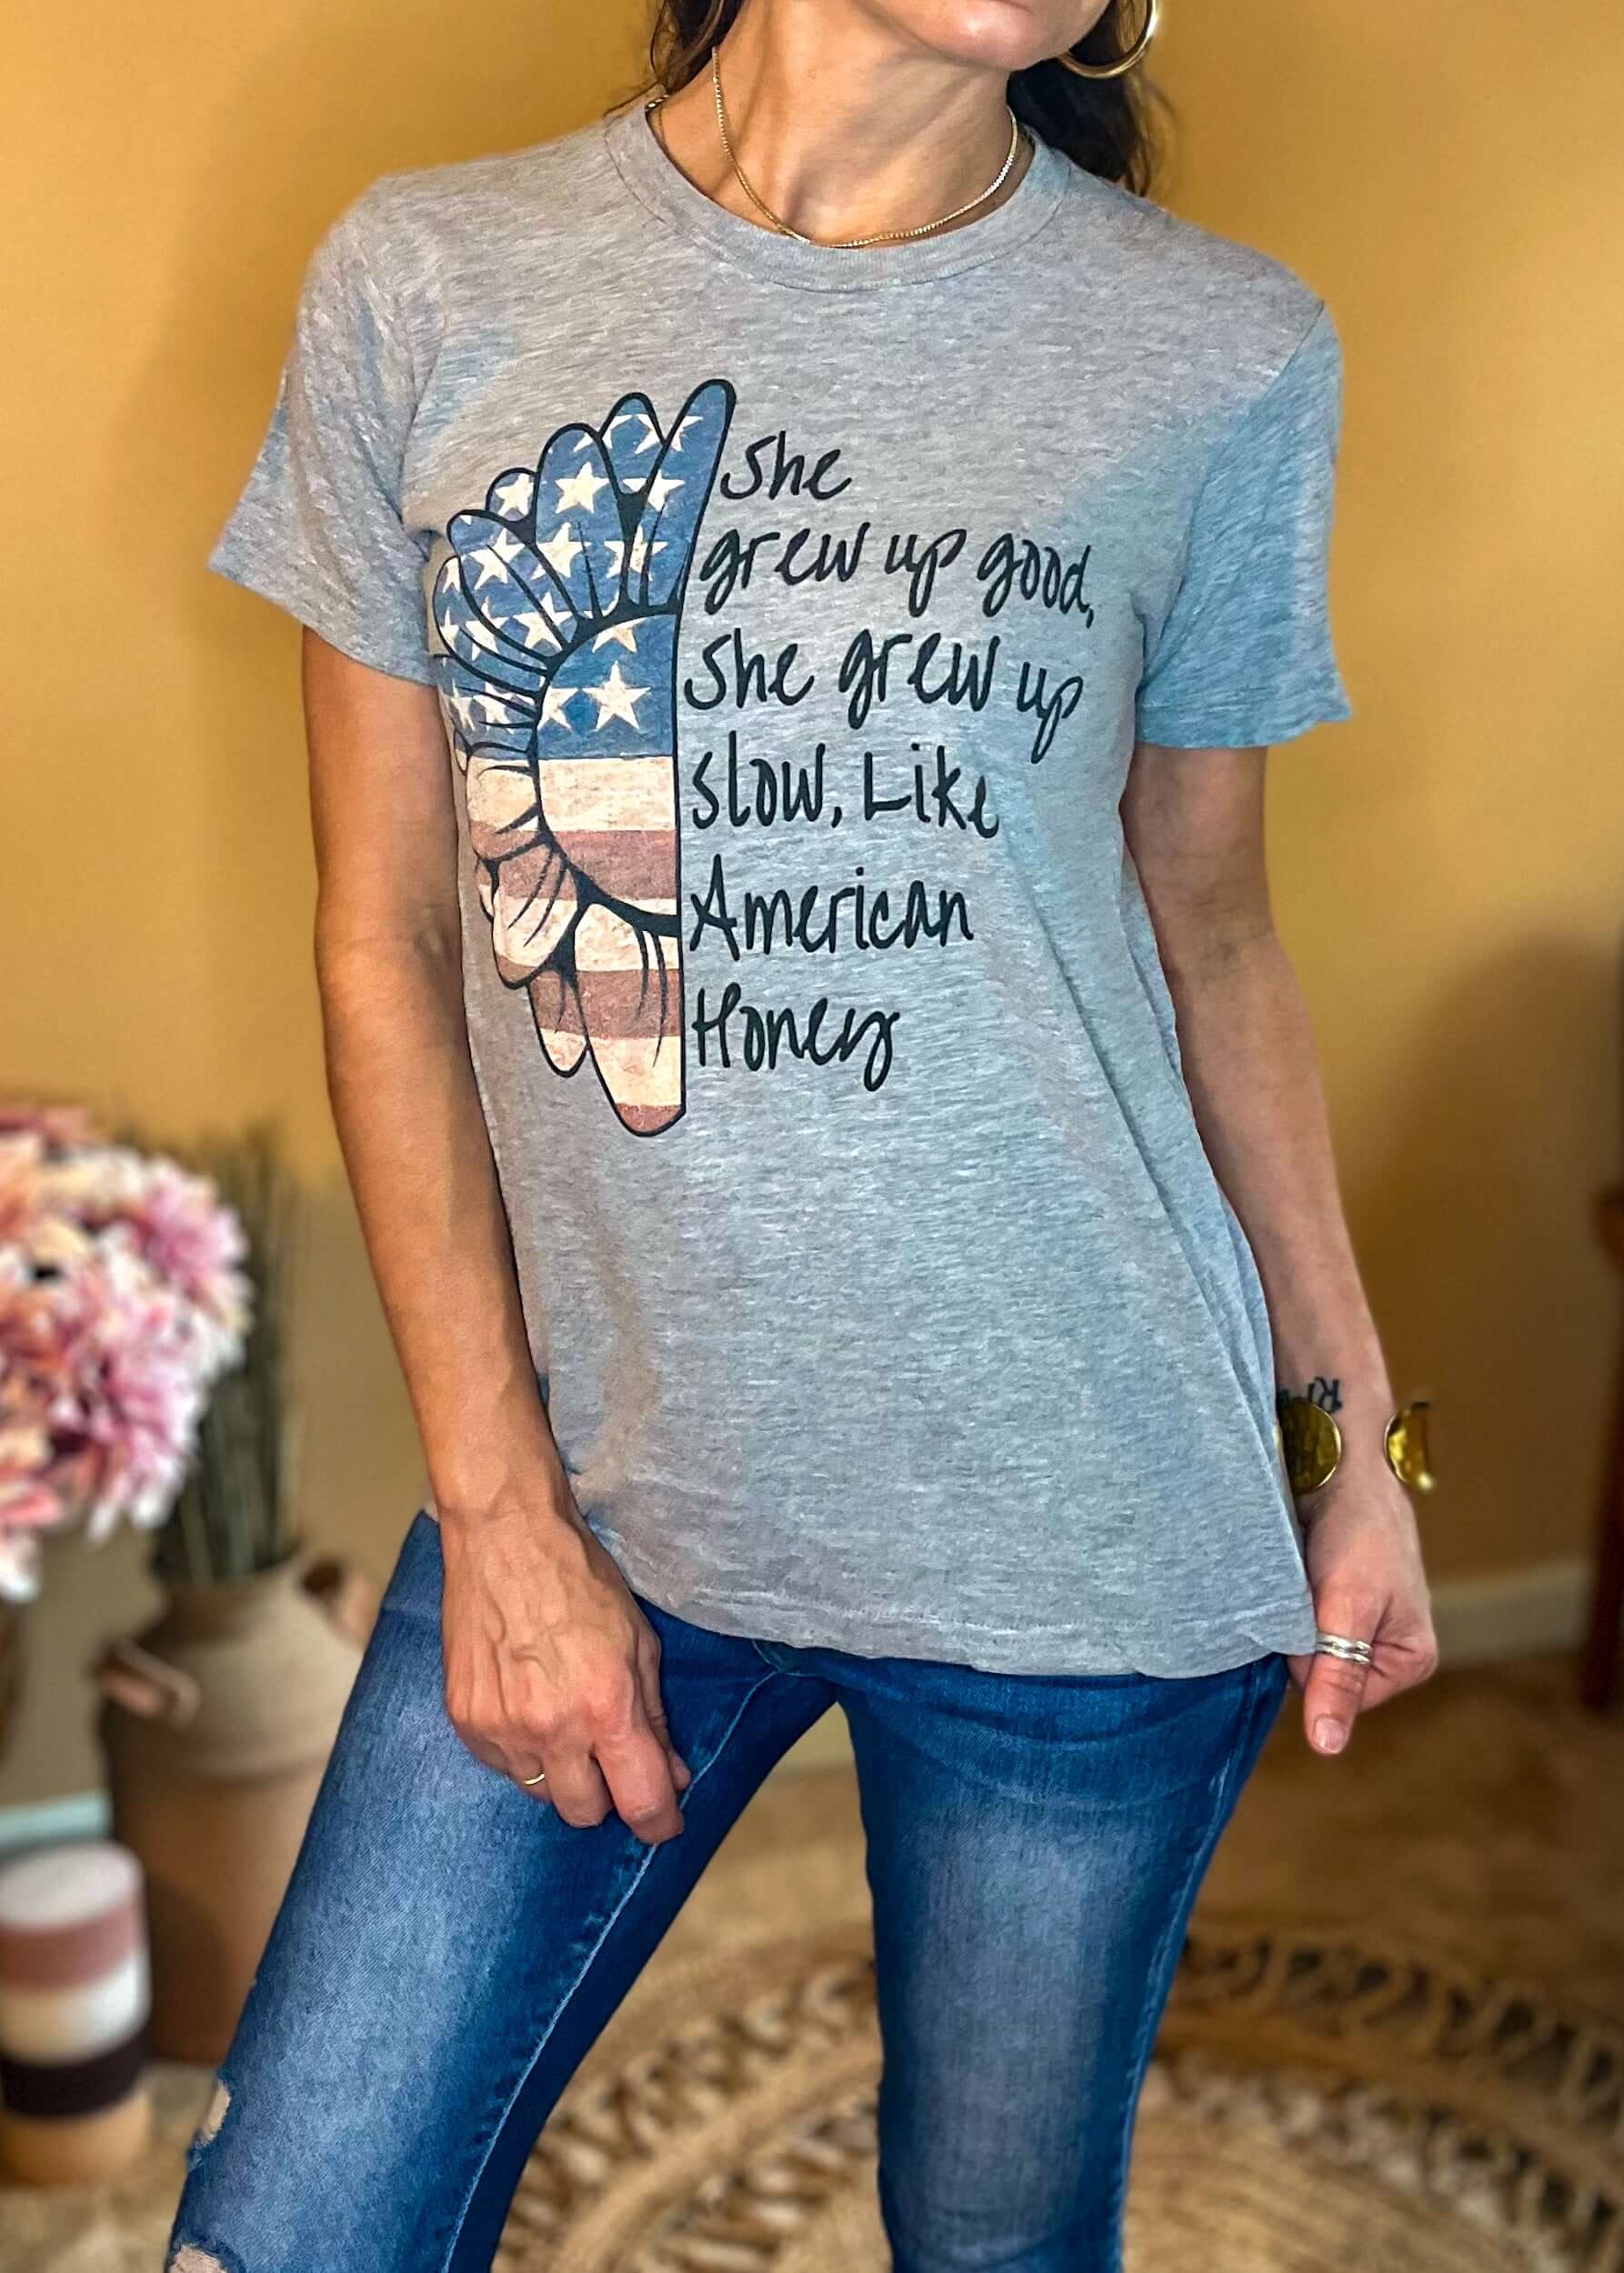 American Honey Graphic Tee Shirts & Tops American Honey, clothing, graphic tees, Lady A American Honey Lyrics, patriotic sunflower graphic tee, sales collection, shirts & tops, short sleeve, tops